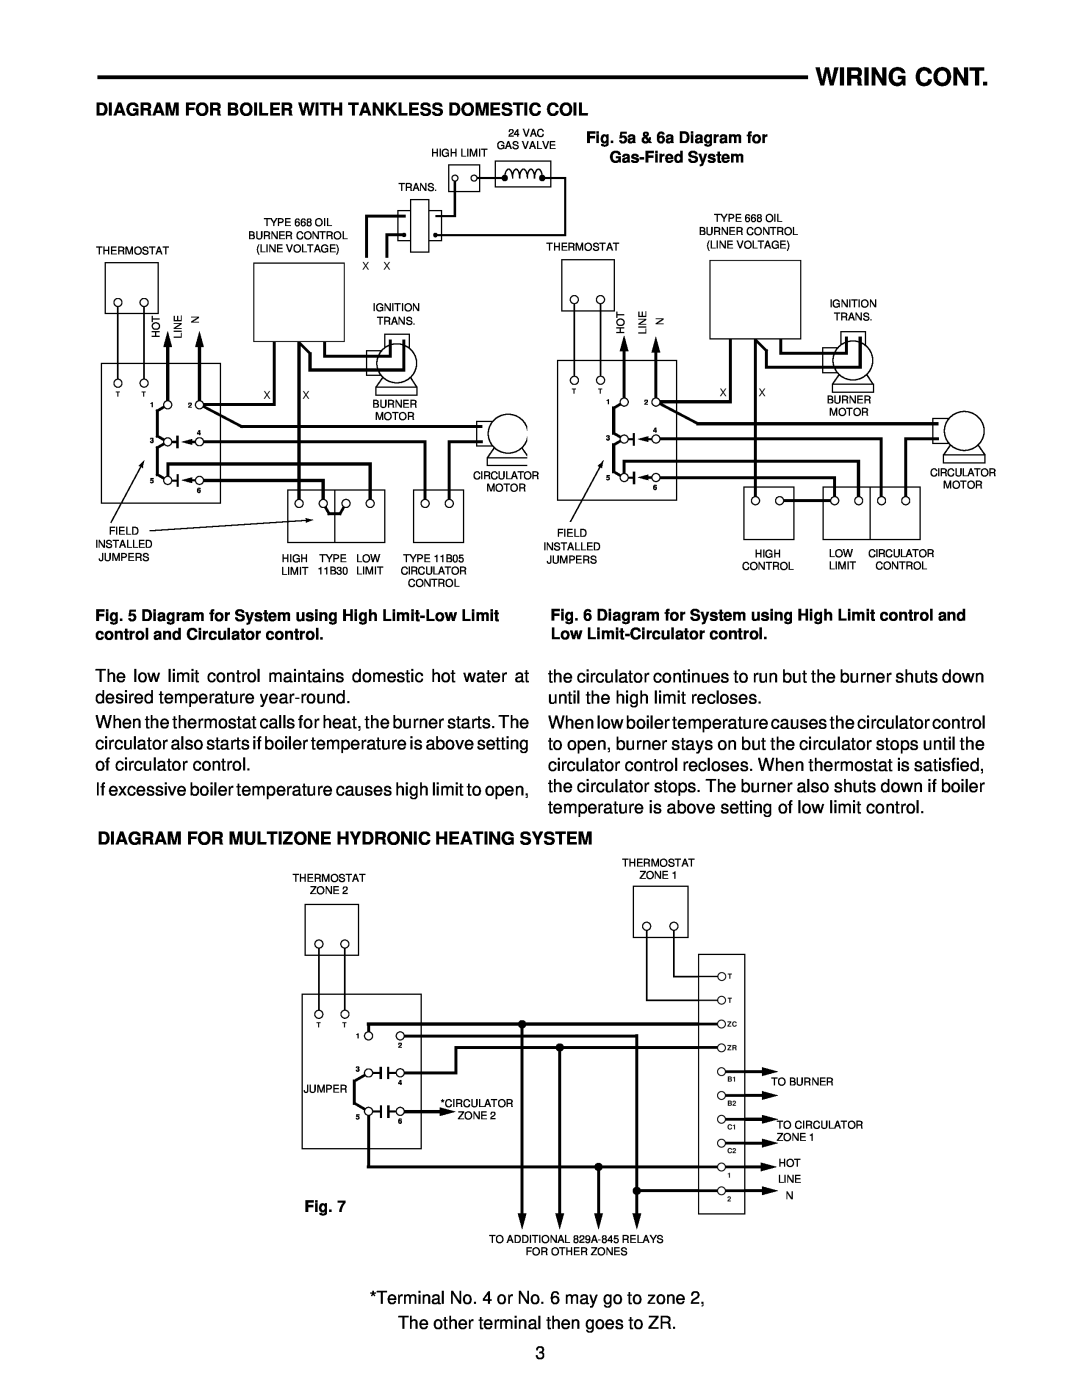 White Rodgers 829A-845 specifications Wiring Cont, Diagram For Boiler With Tankless Domestic Coil 